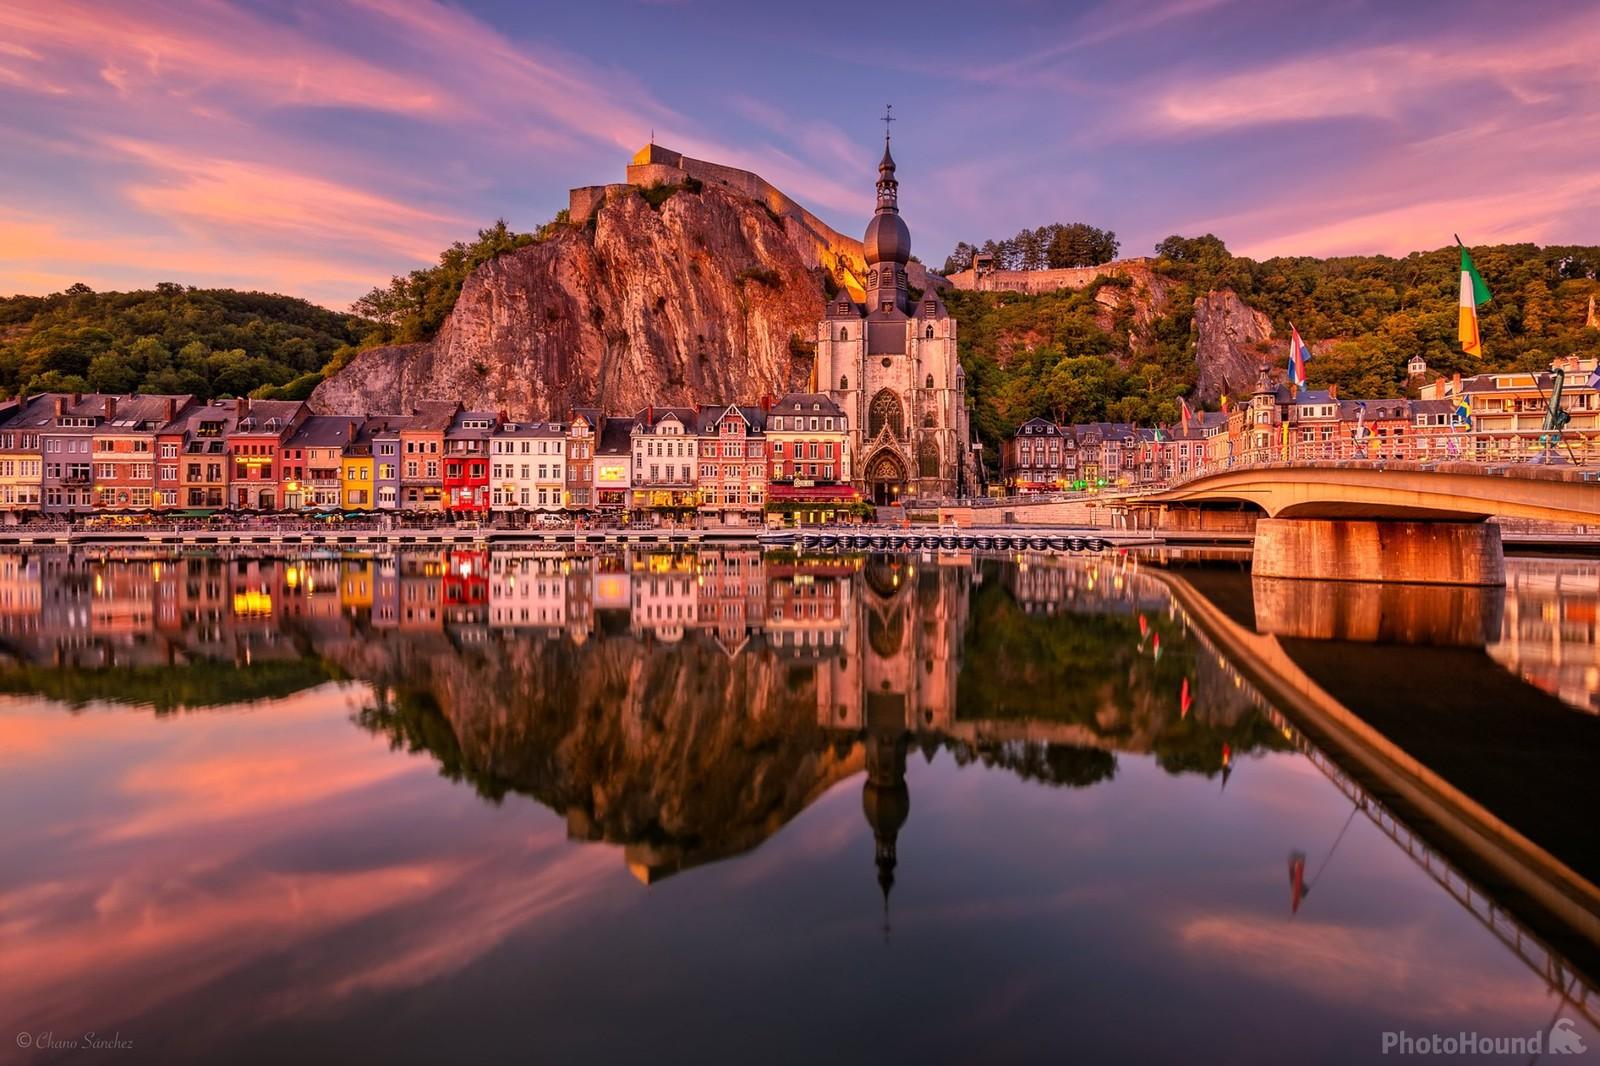 Image of Dinant reflection on the Meuse river at twilight  by Chano Sanchez